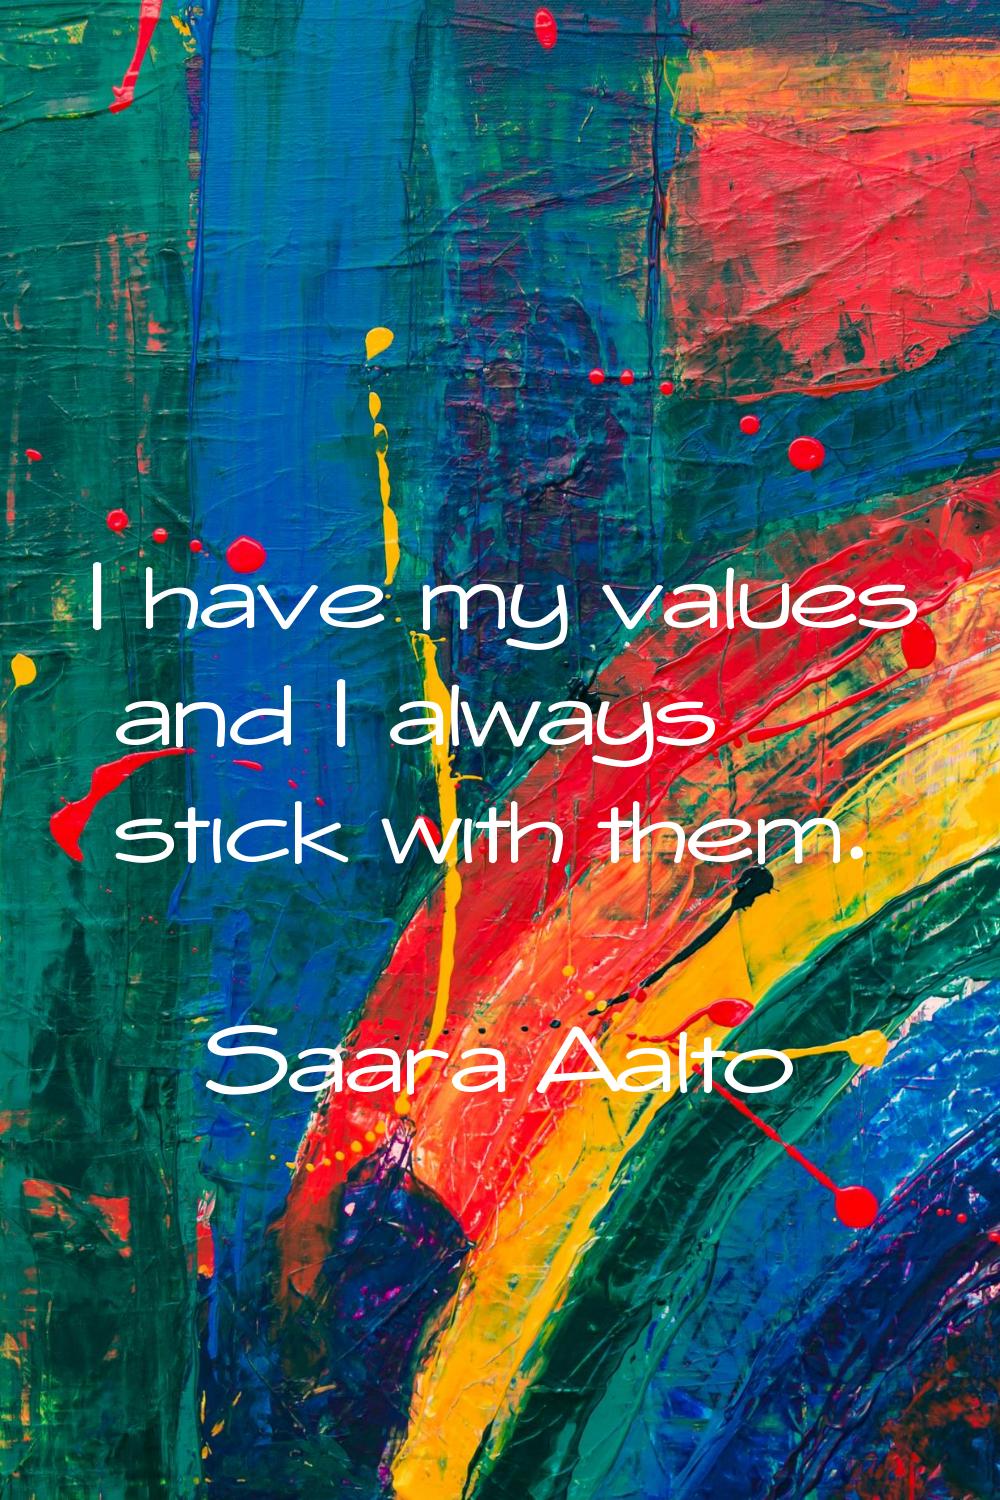 I have my values and I always stick with them.